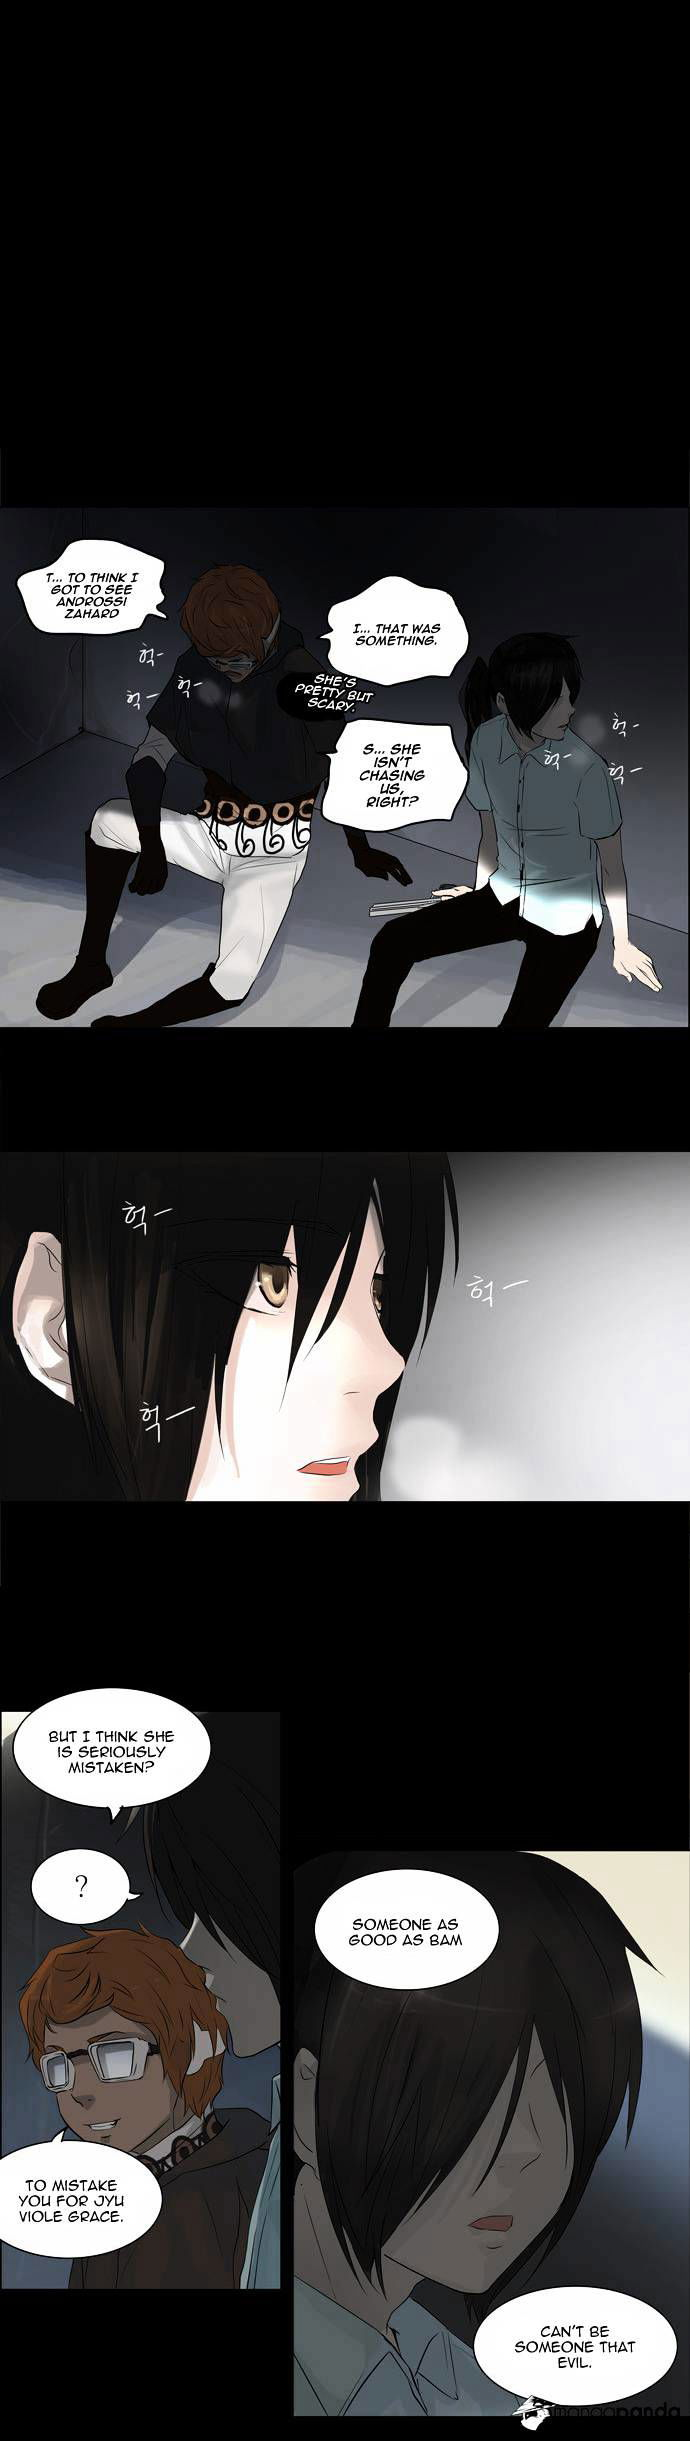 Tower of God Chapter 140 page 10